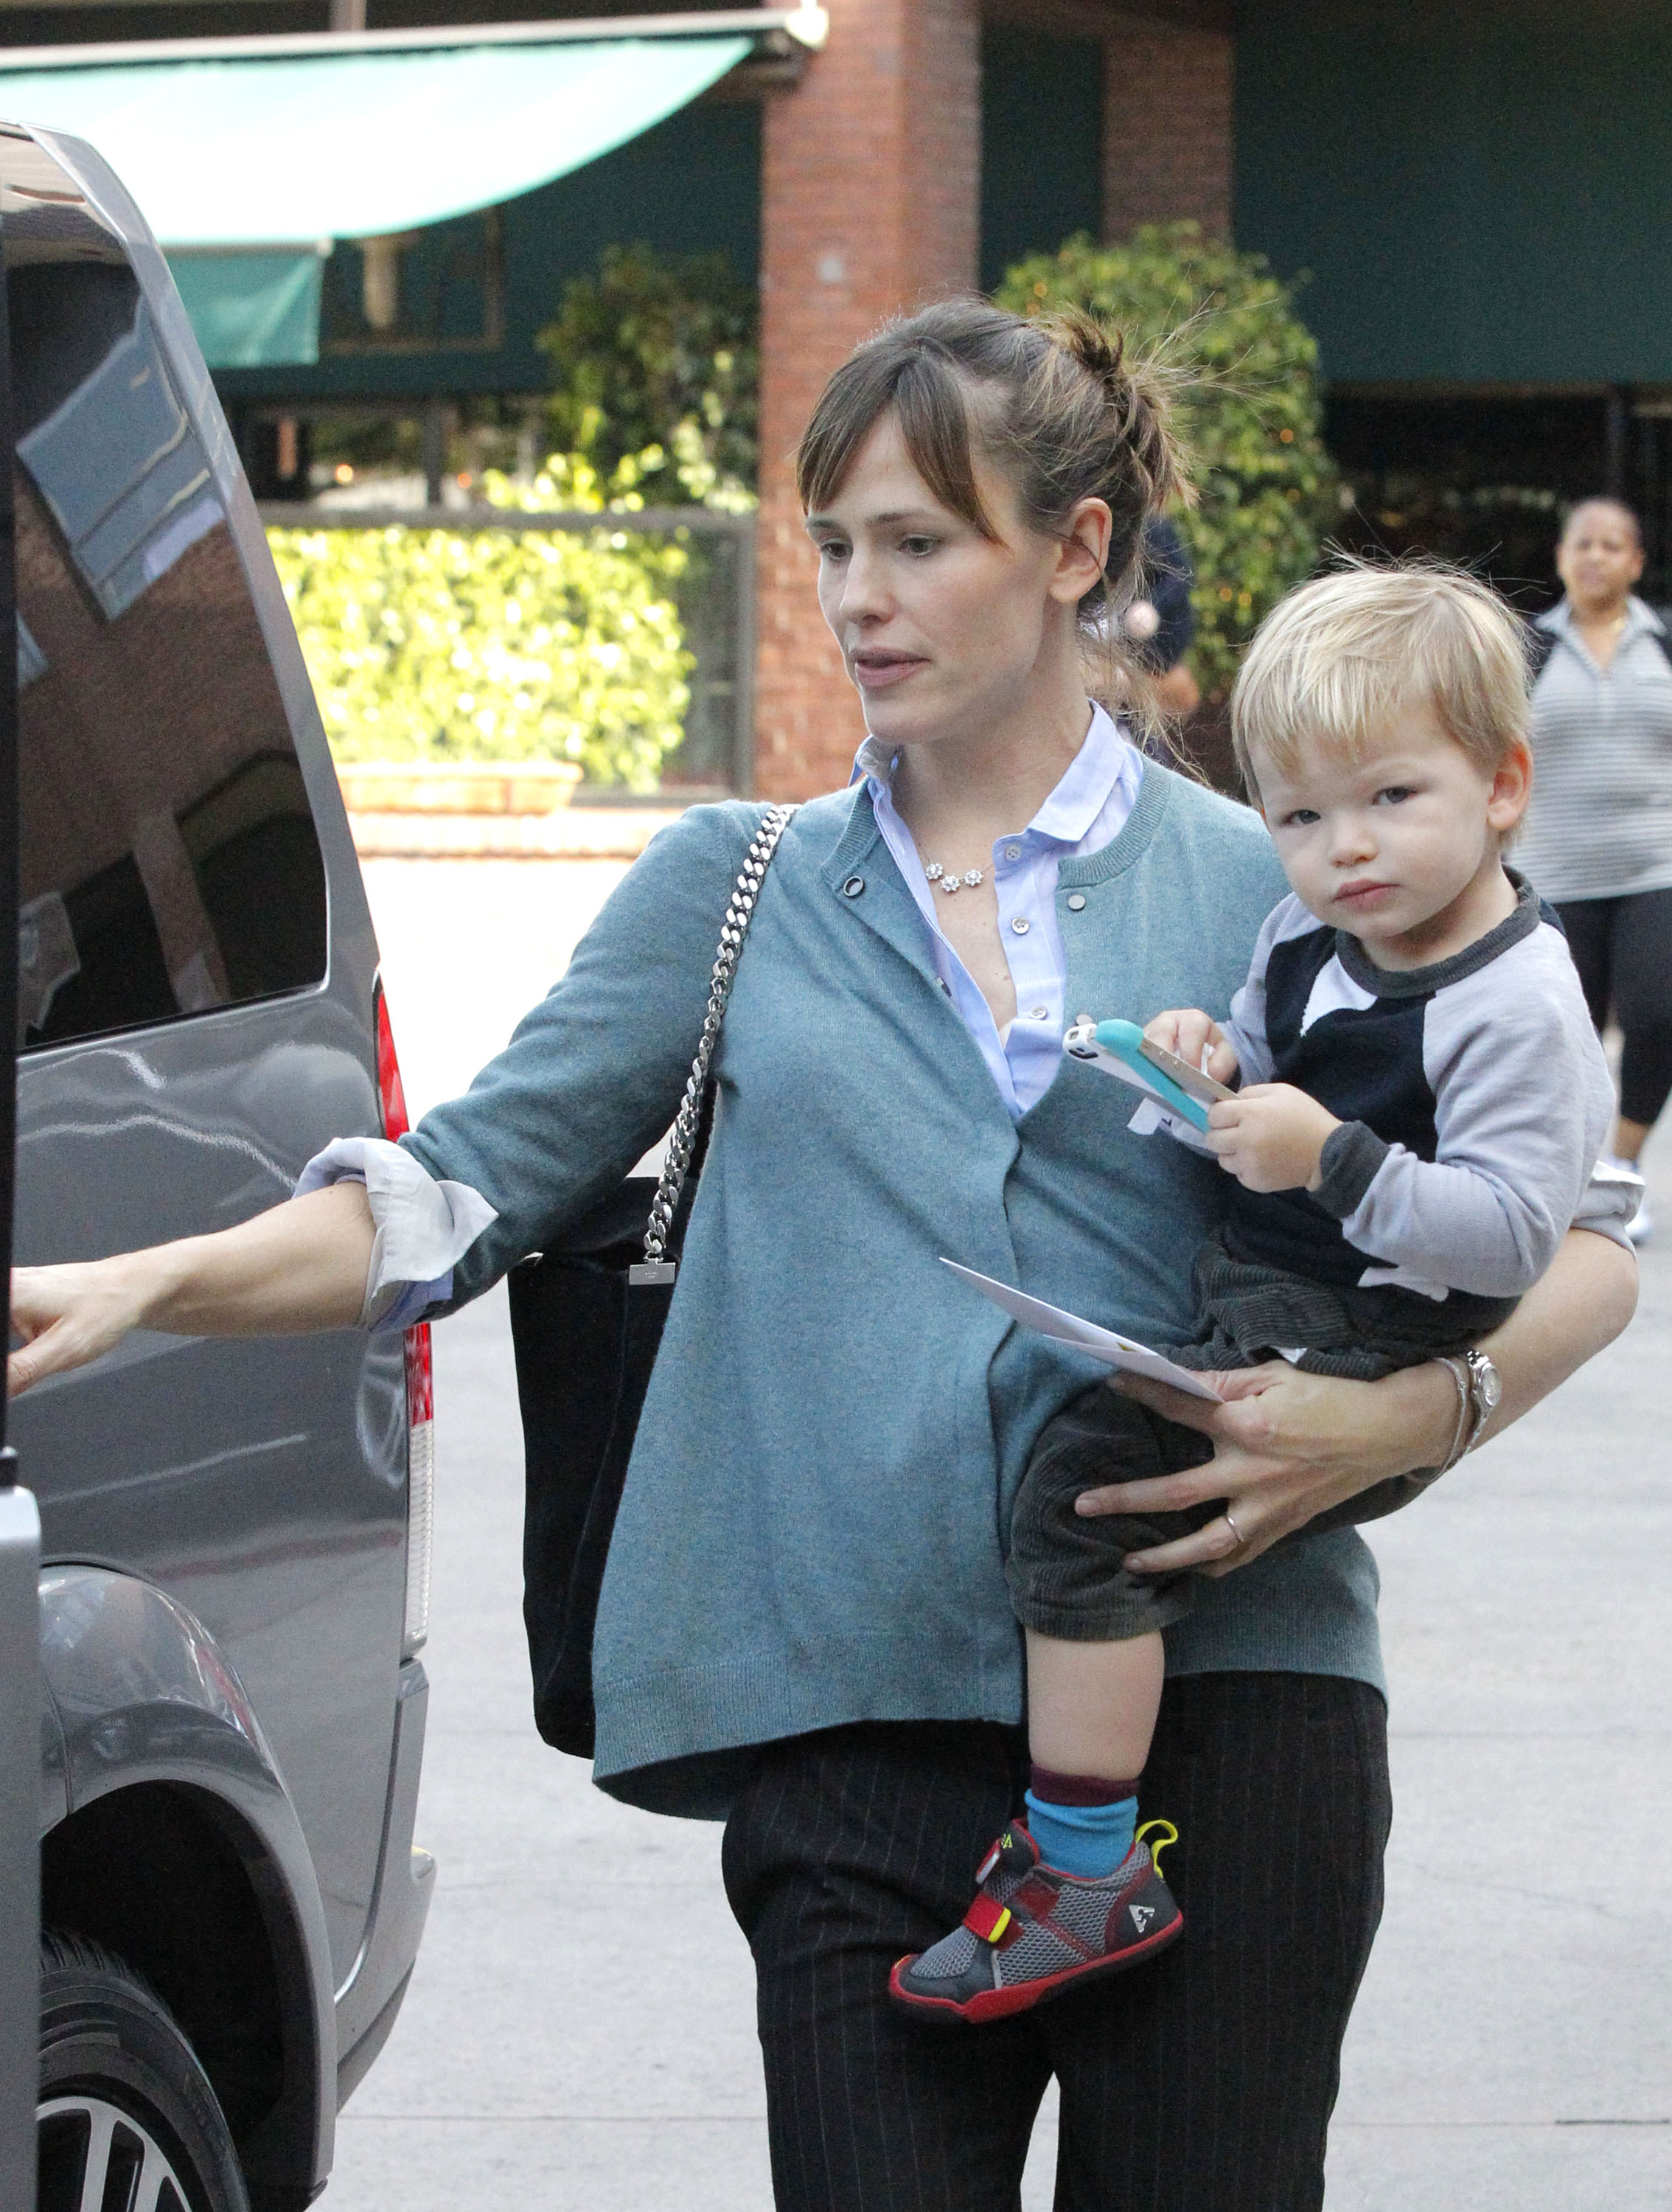 Samuel Garner Affleck looks at the photographer as his mother, Jennifer Garner, carries him on the way to a vehicle on December 17, 2013, in the Brentwood neighborhood of Los Angeles, California. | Source: Getty Images